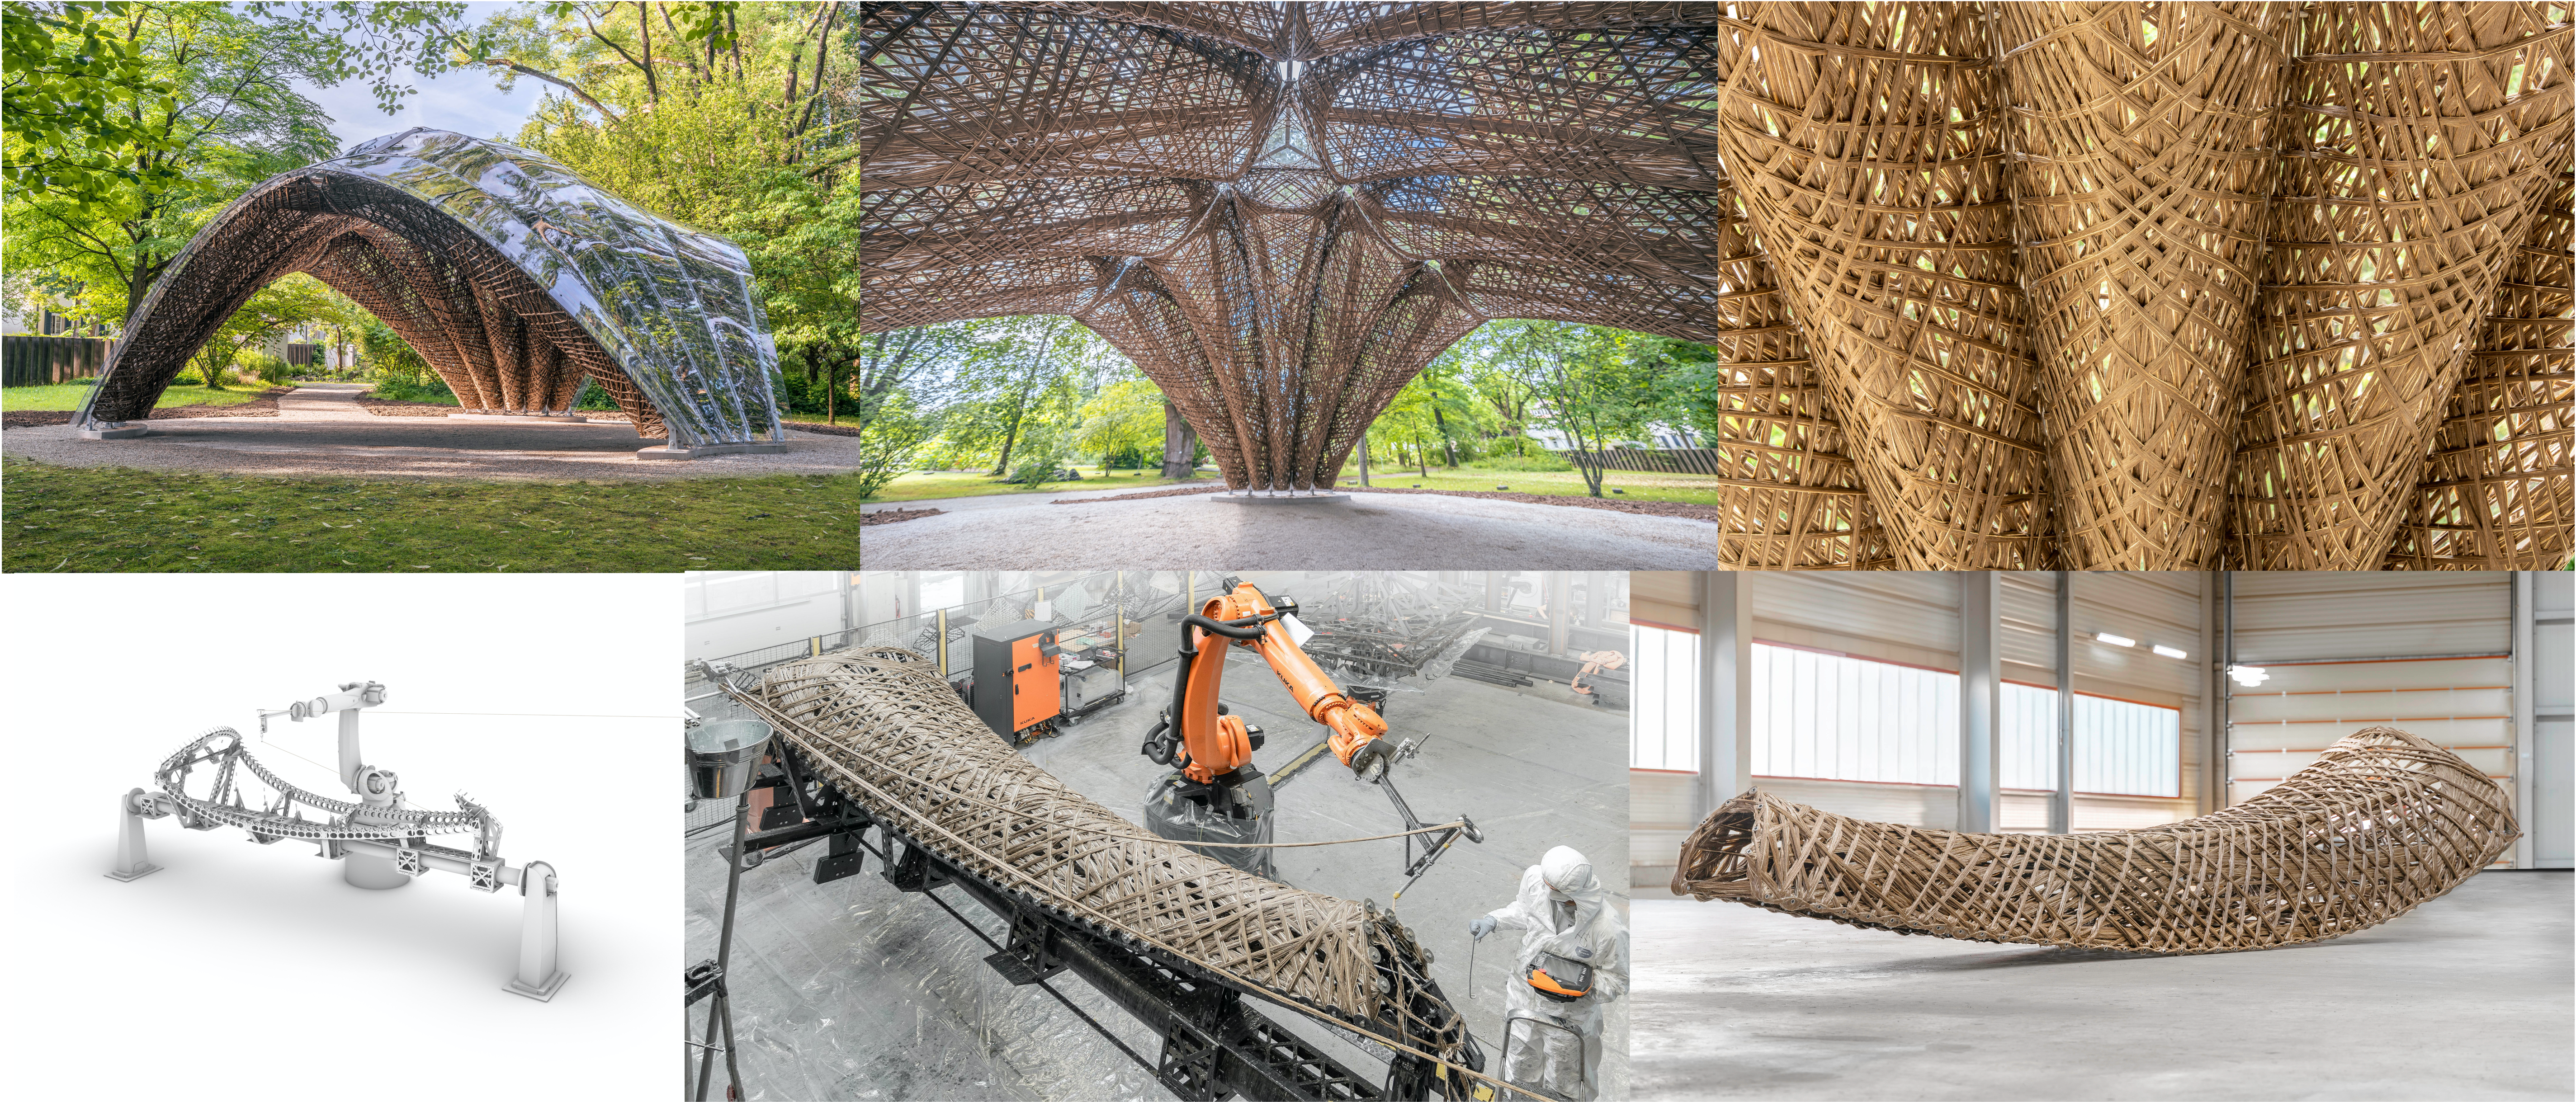 You can see three photos of the livMatS pavilion, showing the complete pavilion in the form of a hemisphere open at the side, a view from the inside of the filigree winding structure and a detailed view of the wound elements.